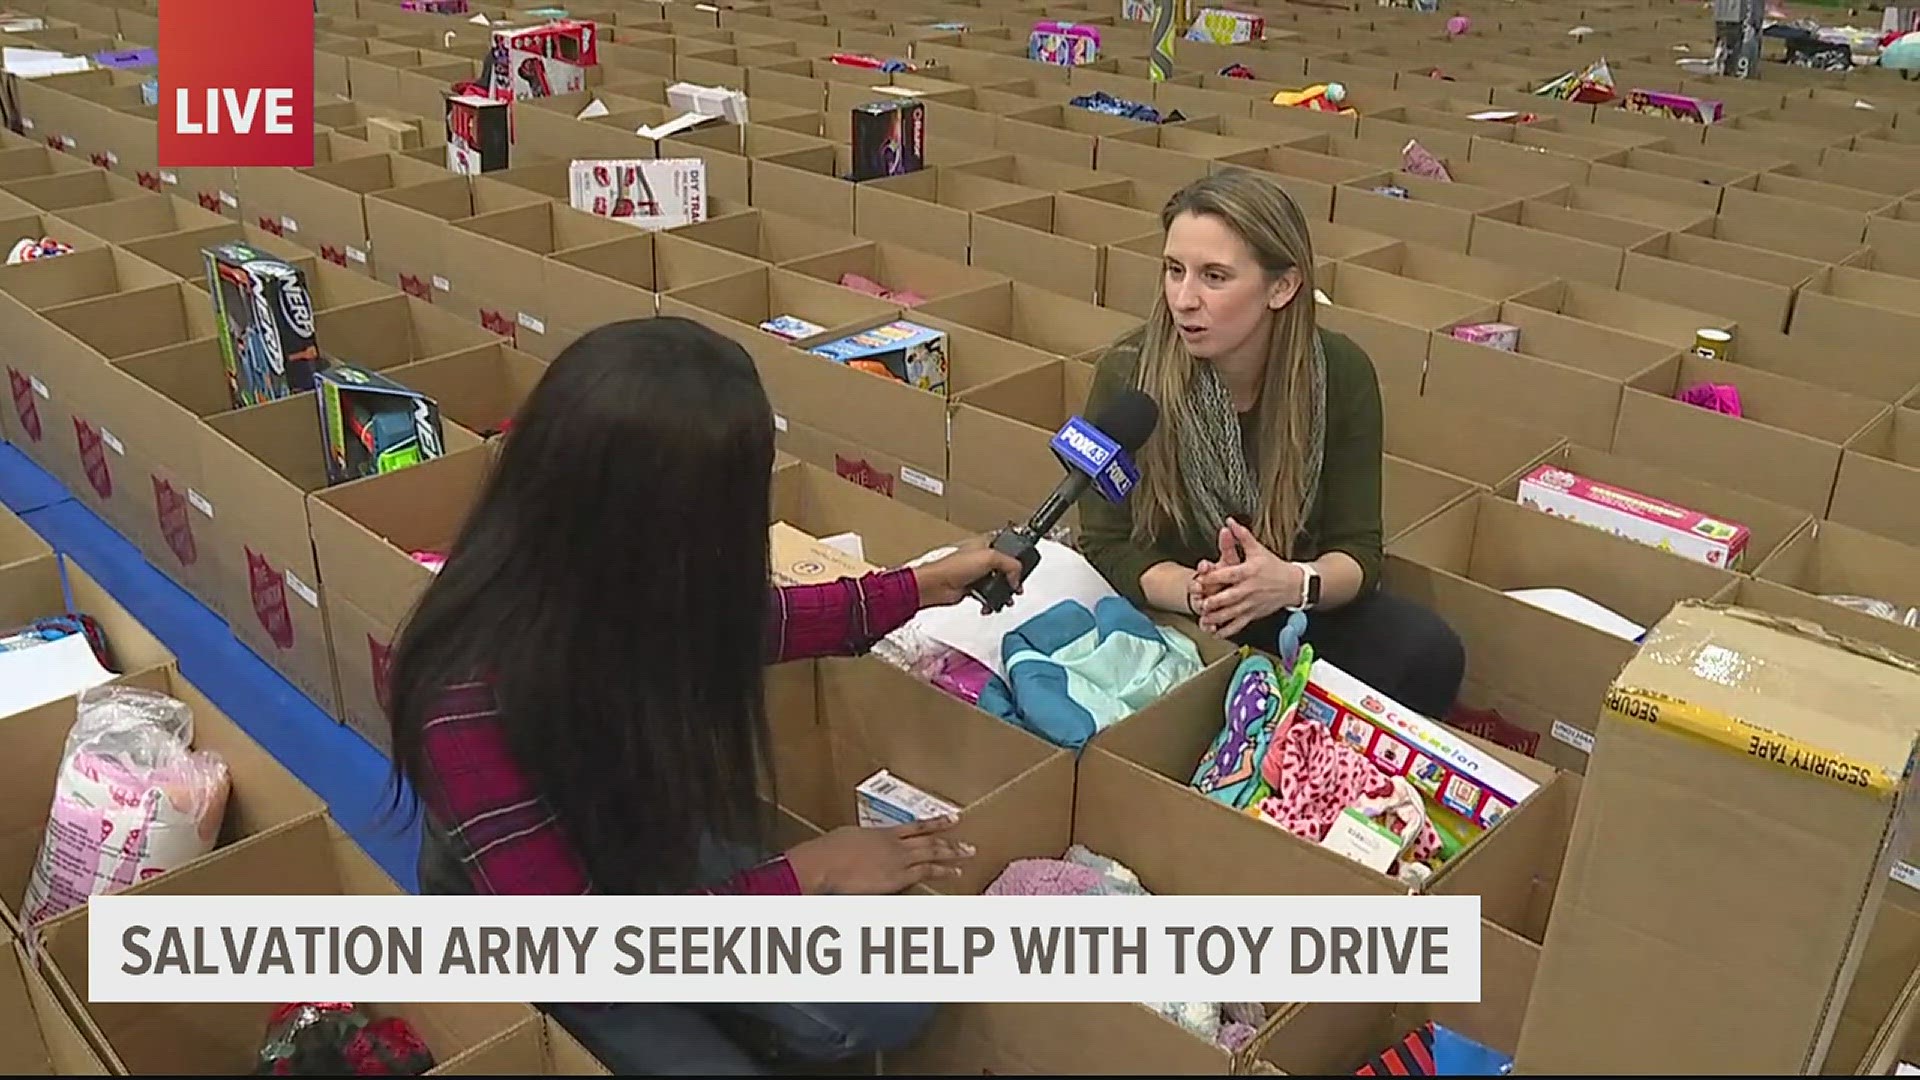 Here's how you can help the organization give families in need a happy holiday.